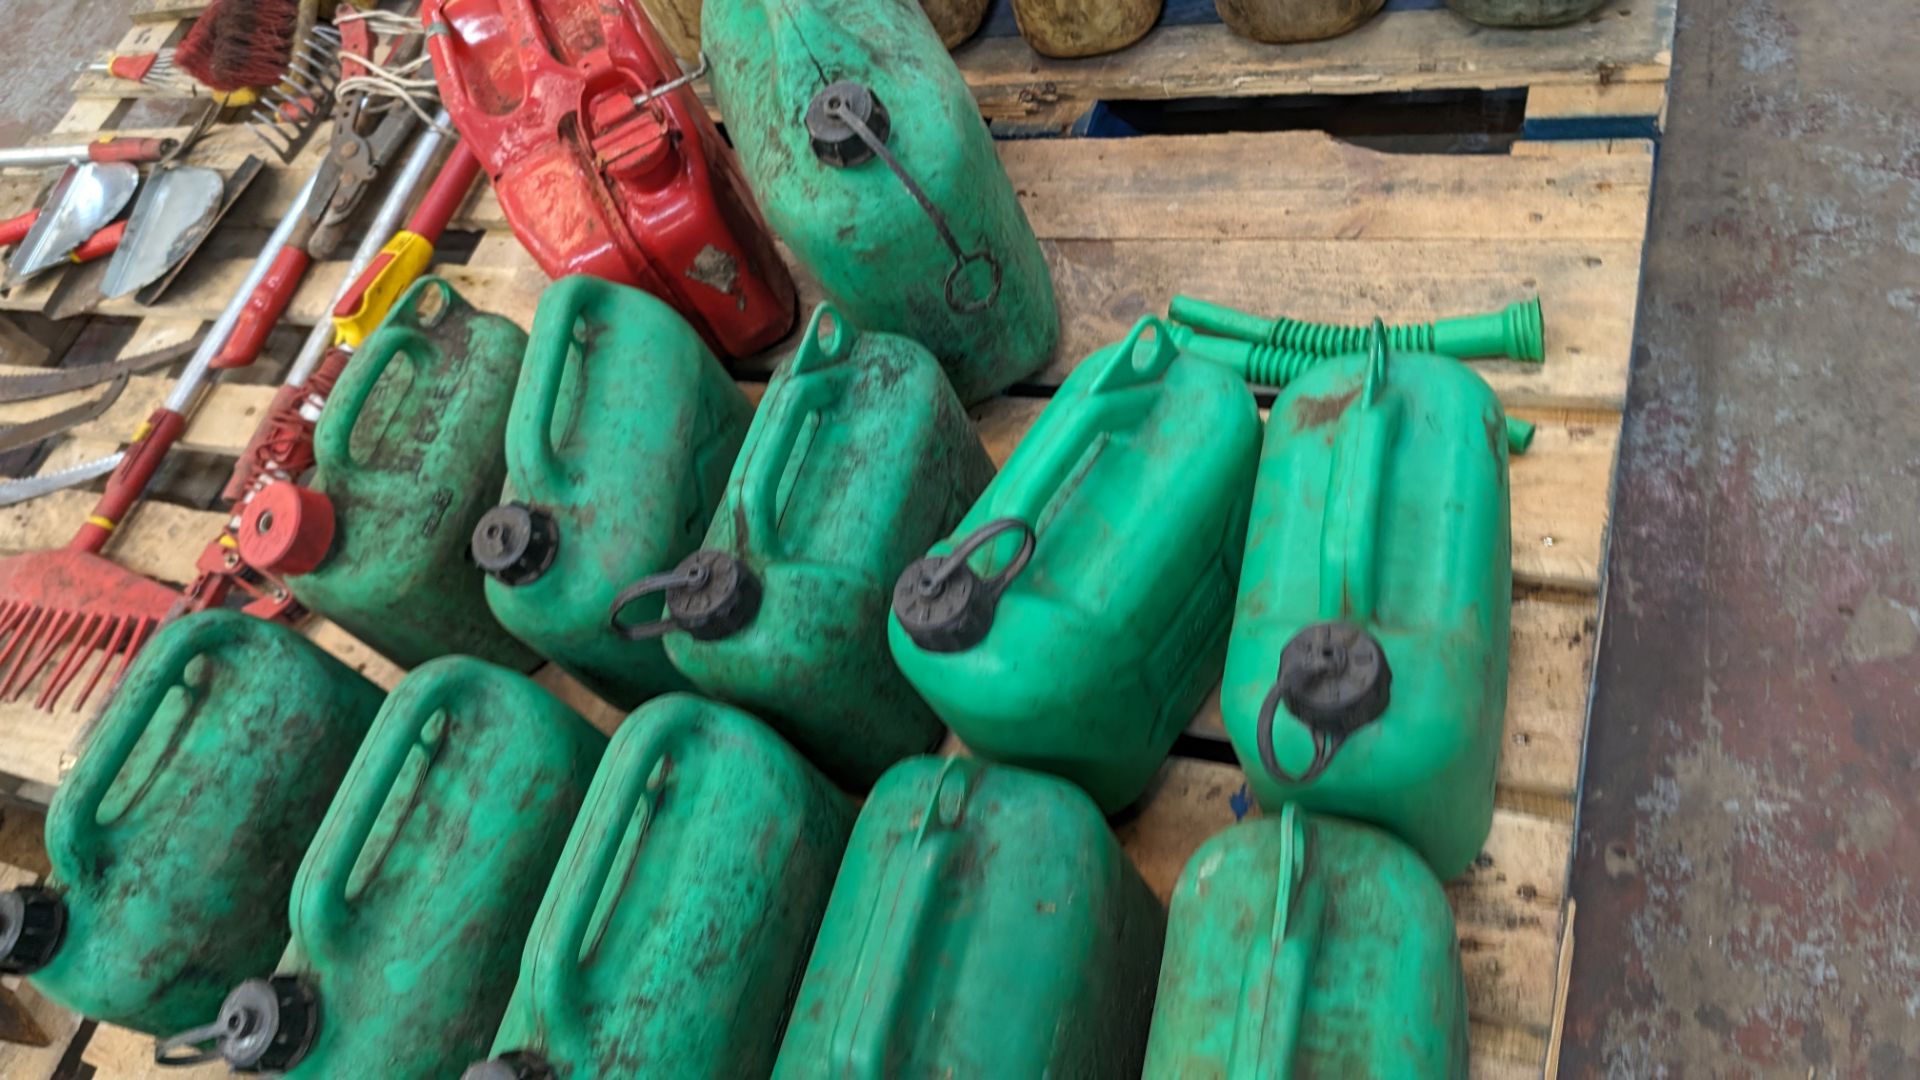 The contents of a pallet of plastic fuel cans - Image 6 of 7